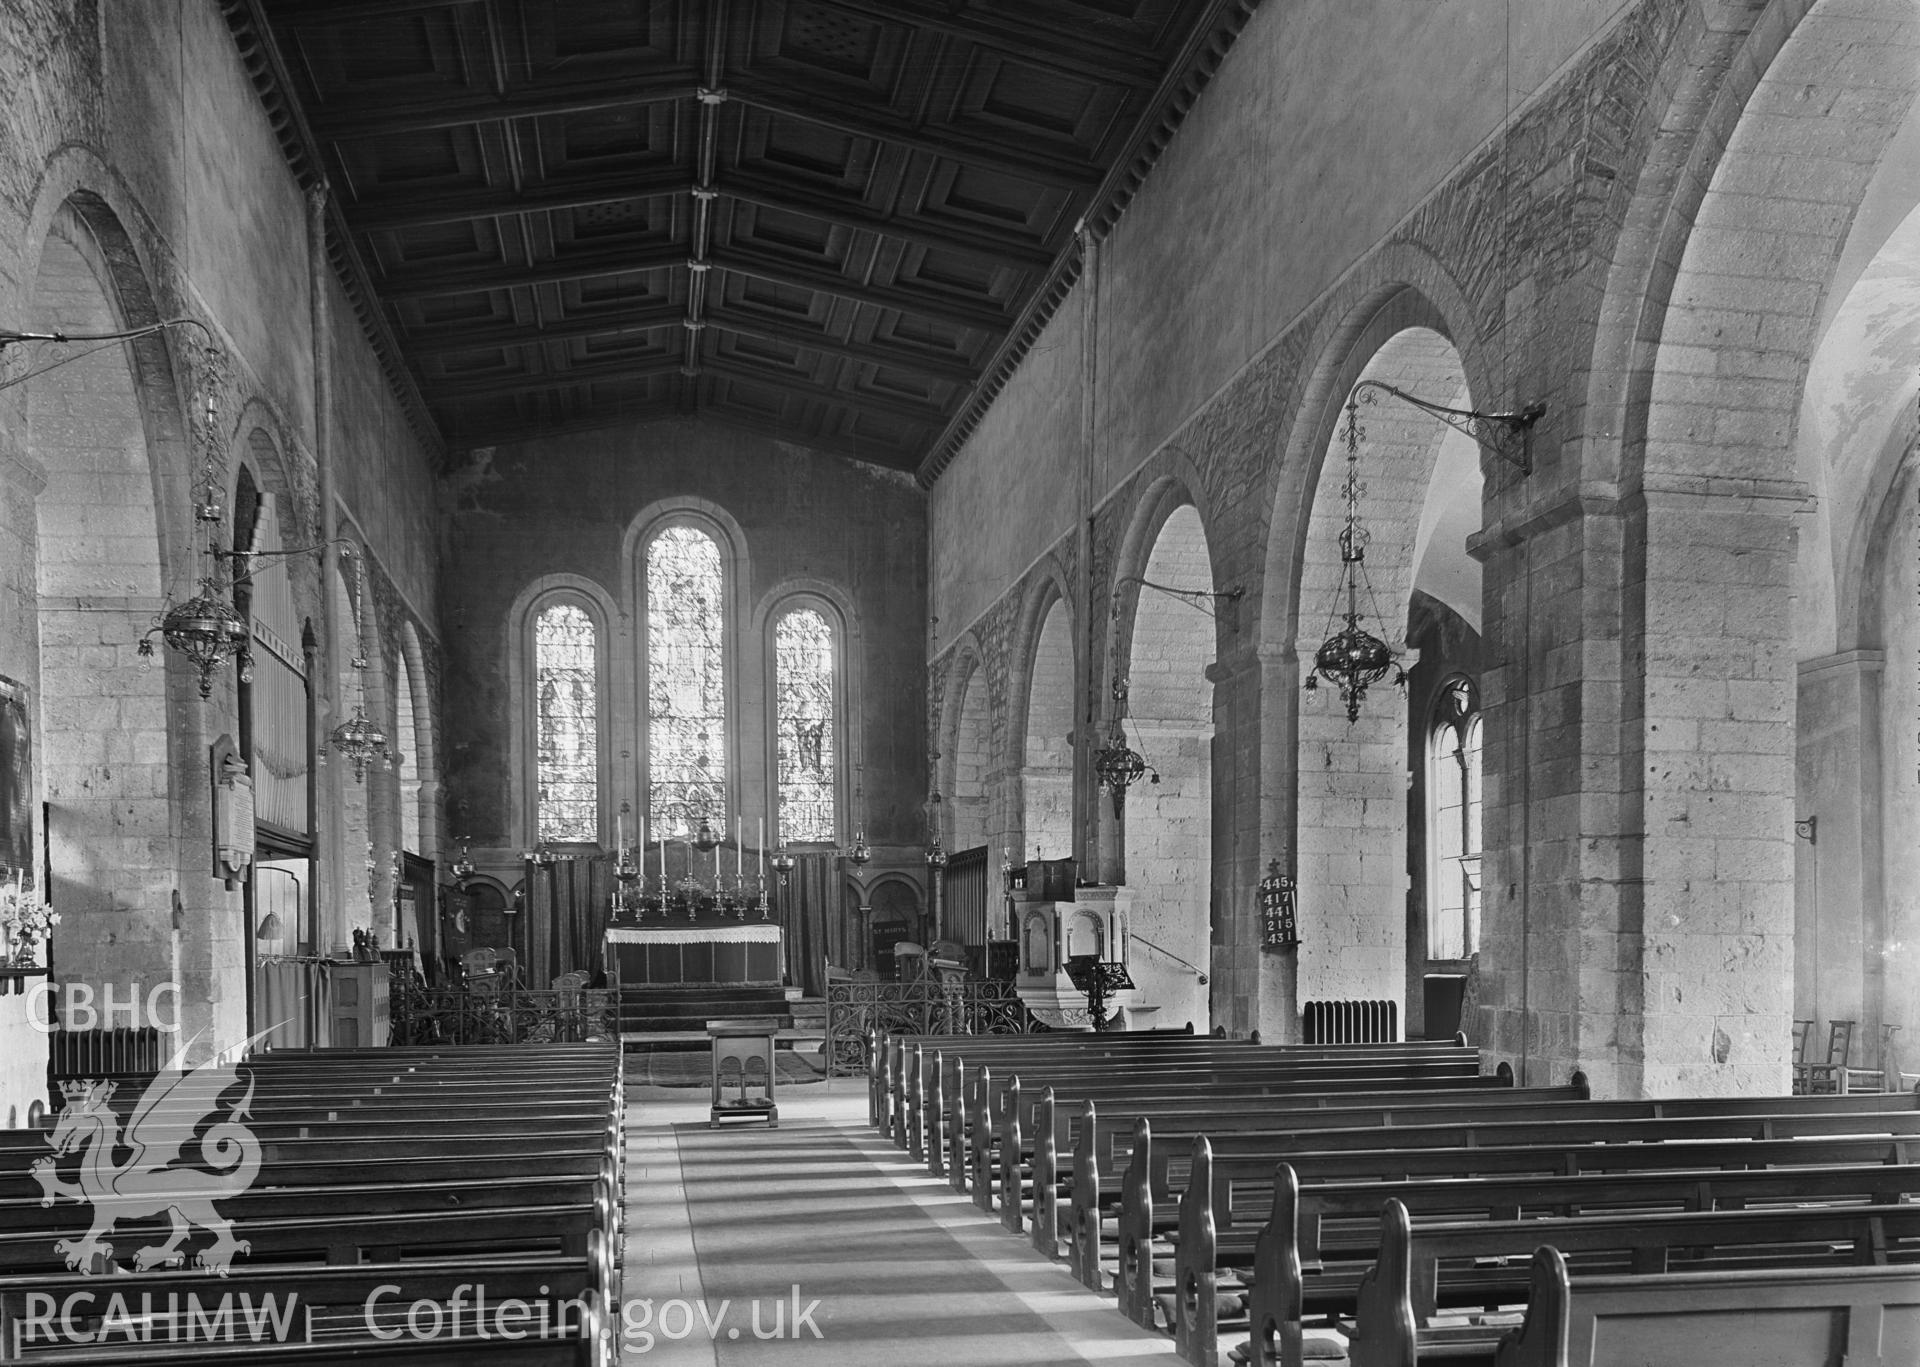 The nave at St Mary's Church, Margam.